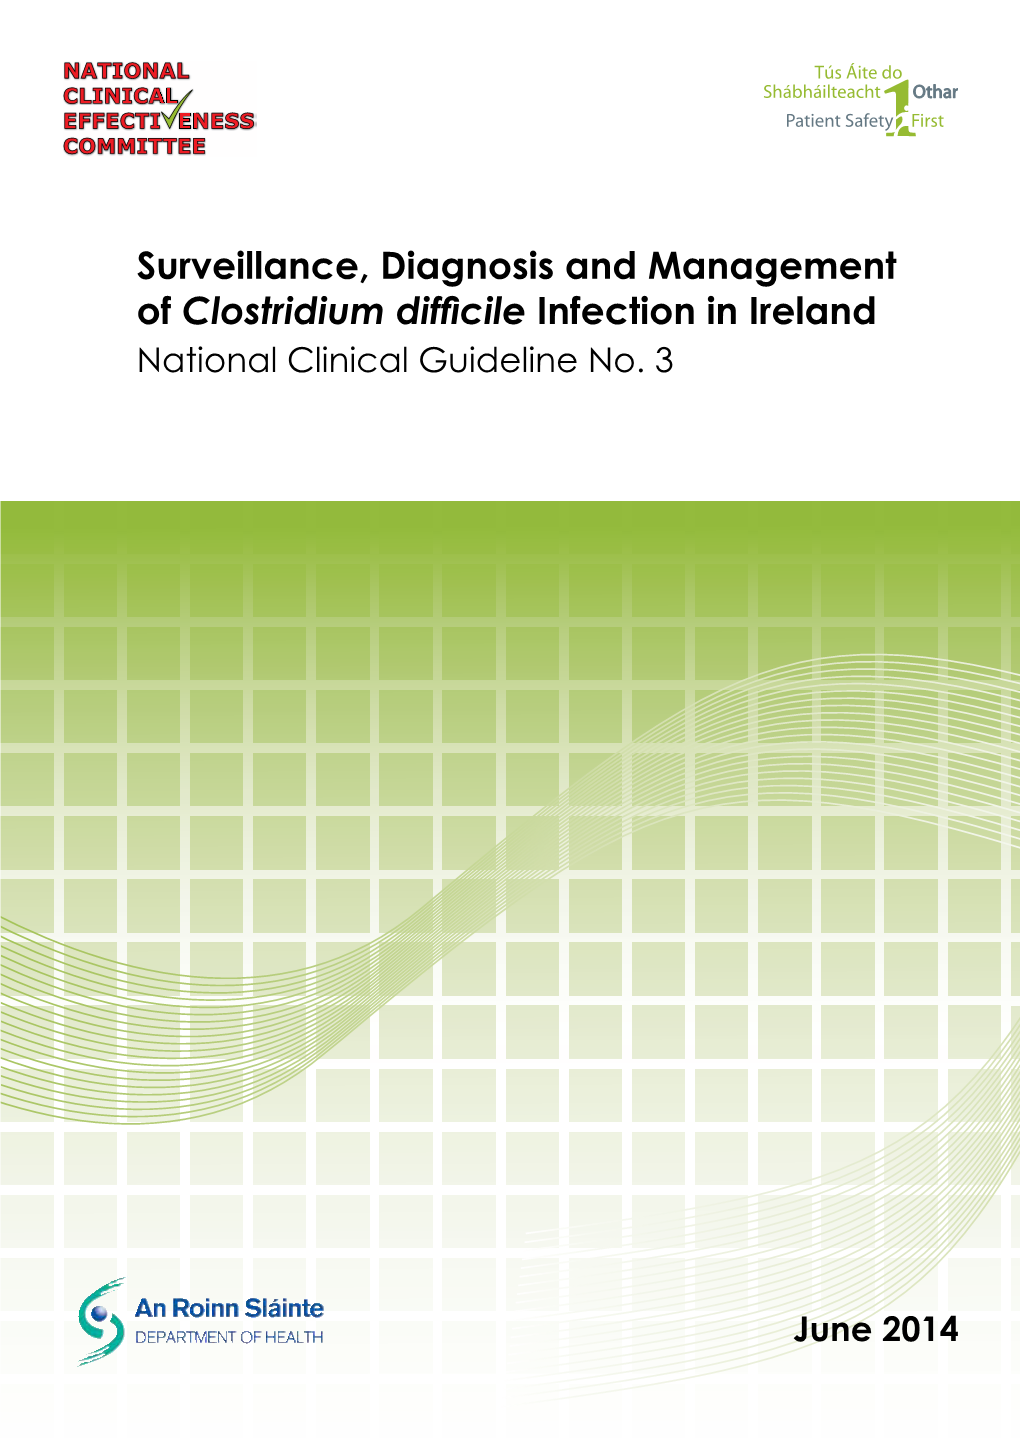 Surveillance, Diagnosis and Management of Clostridium Difficile Infection in Ireland National Clinical Guideline No